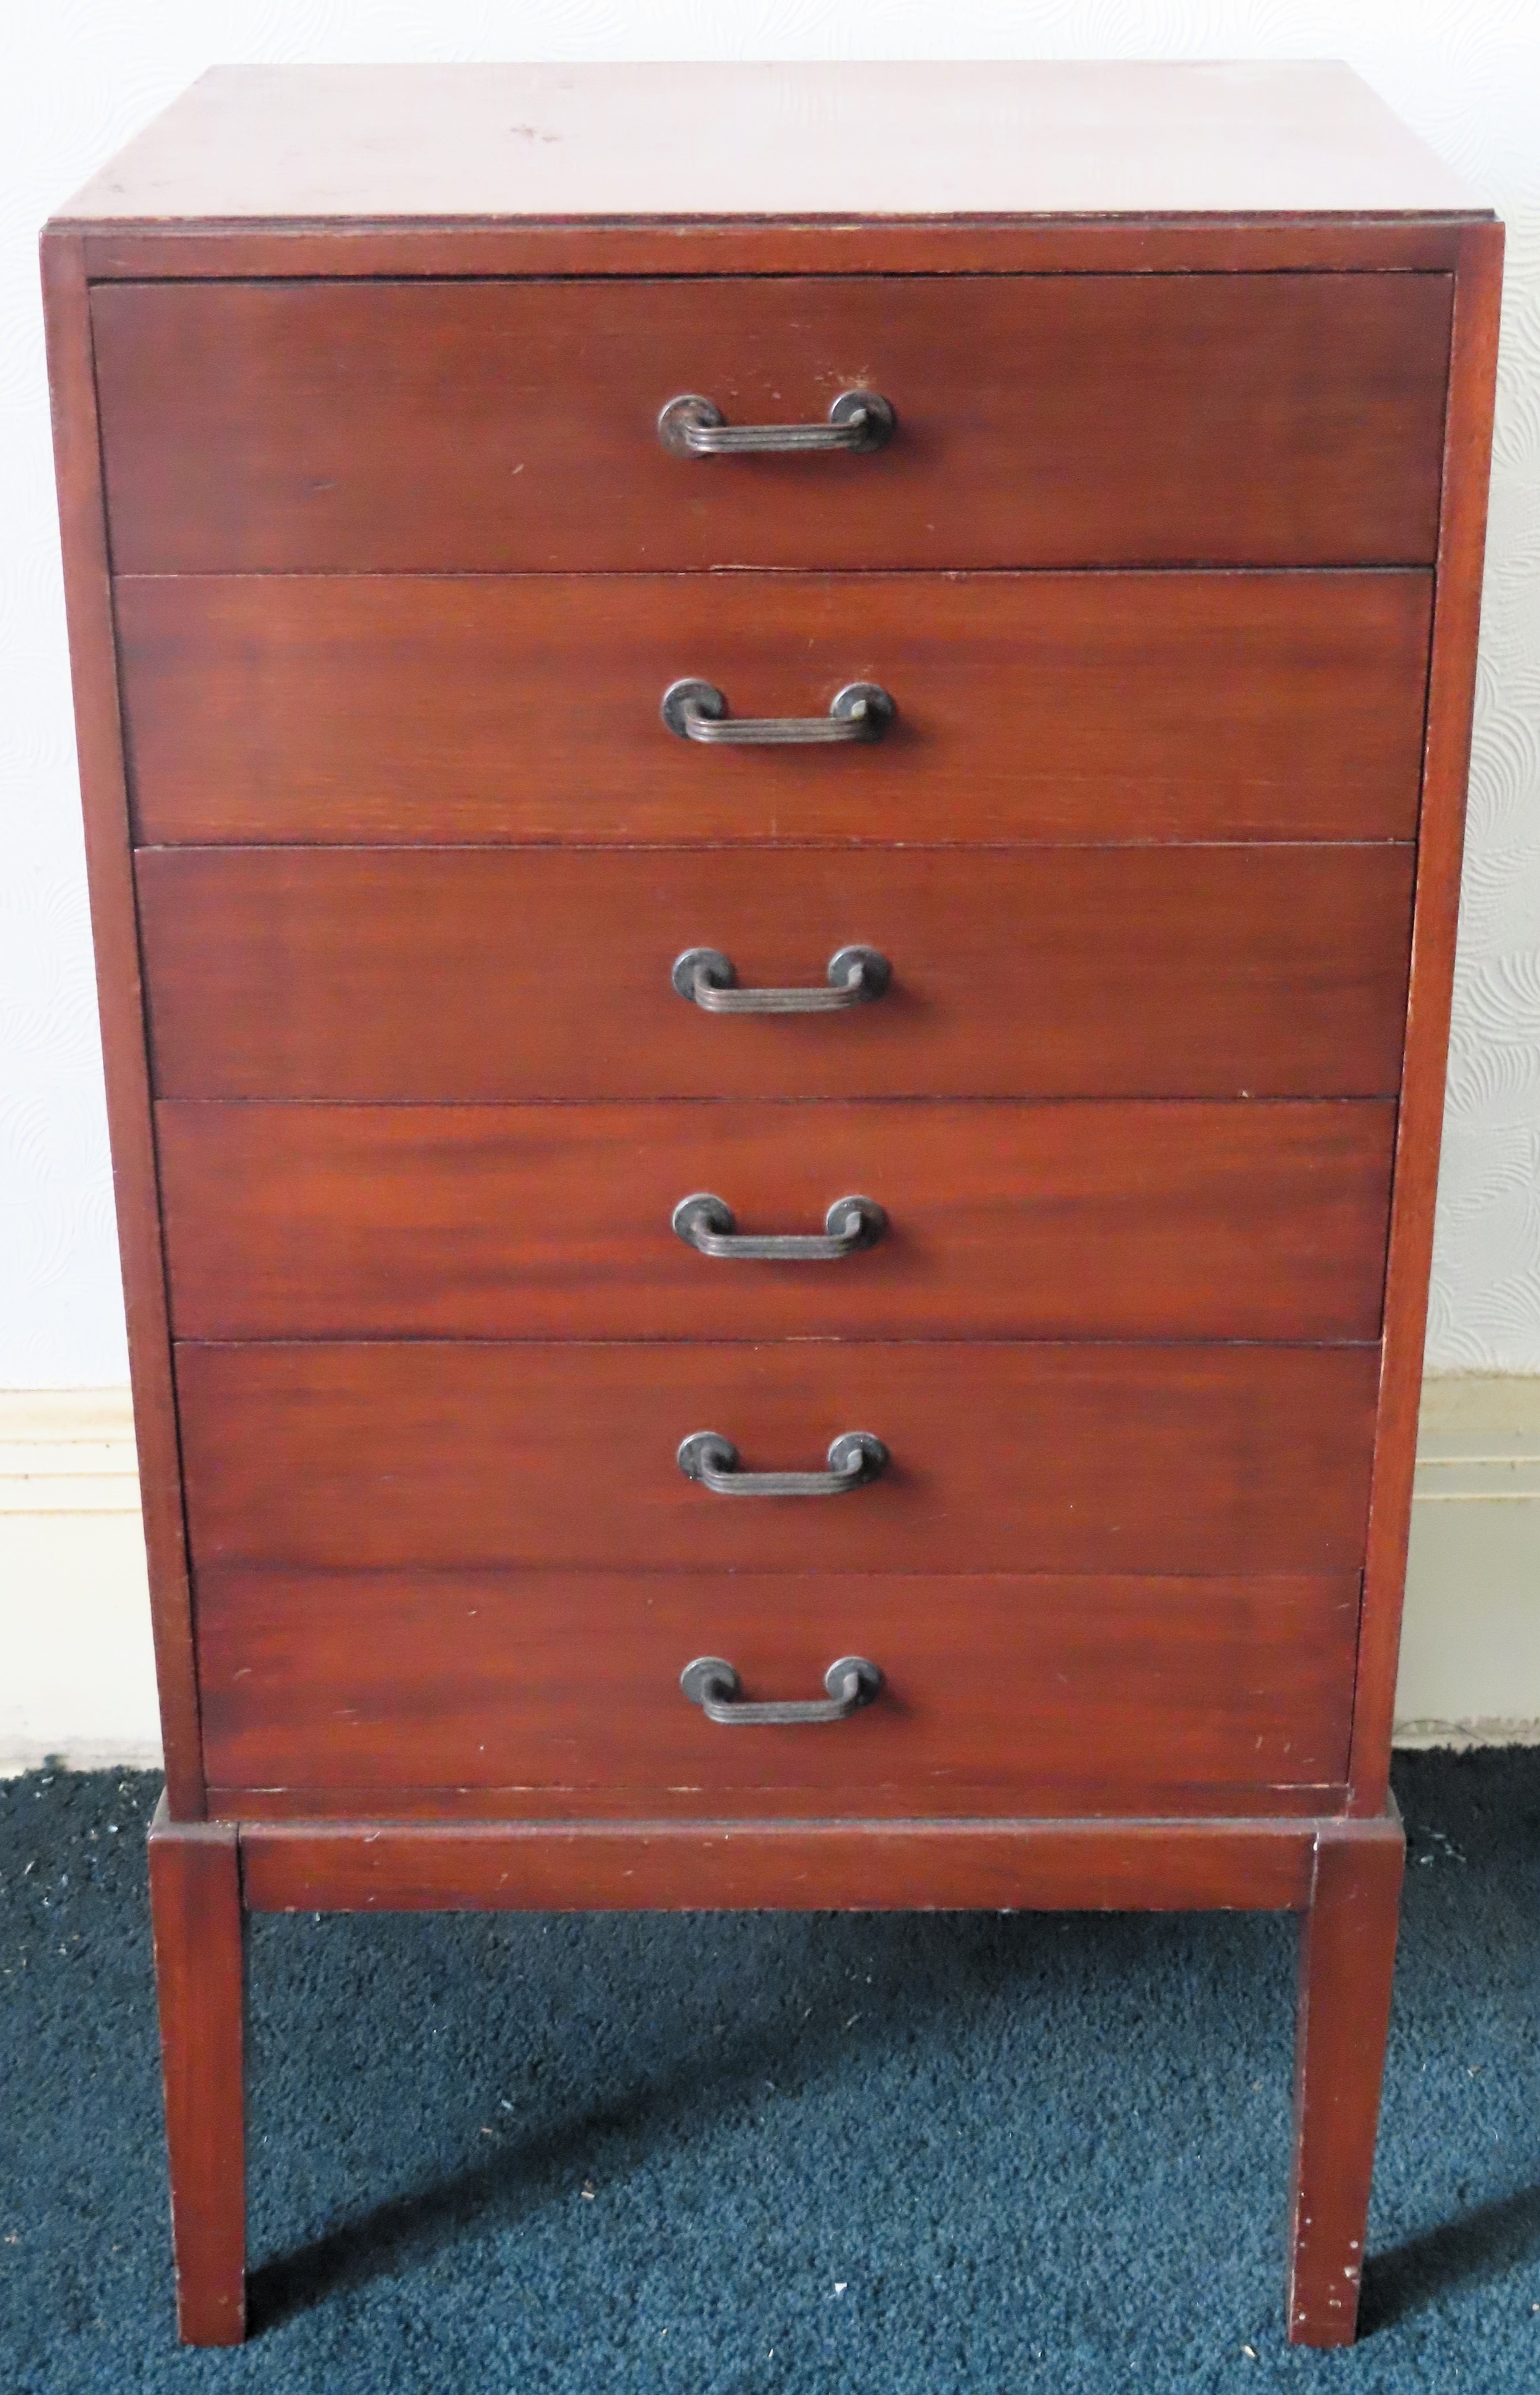 20th century mahogany music cabinet with drop front drawers. Approx. 86.5cm H x 46.5cm W x 39.5cm